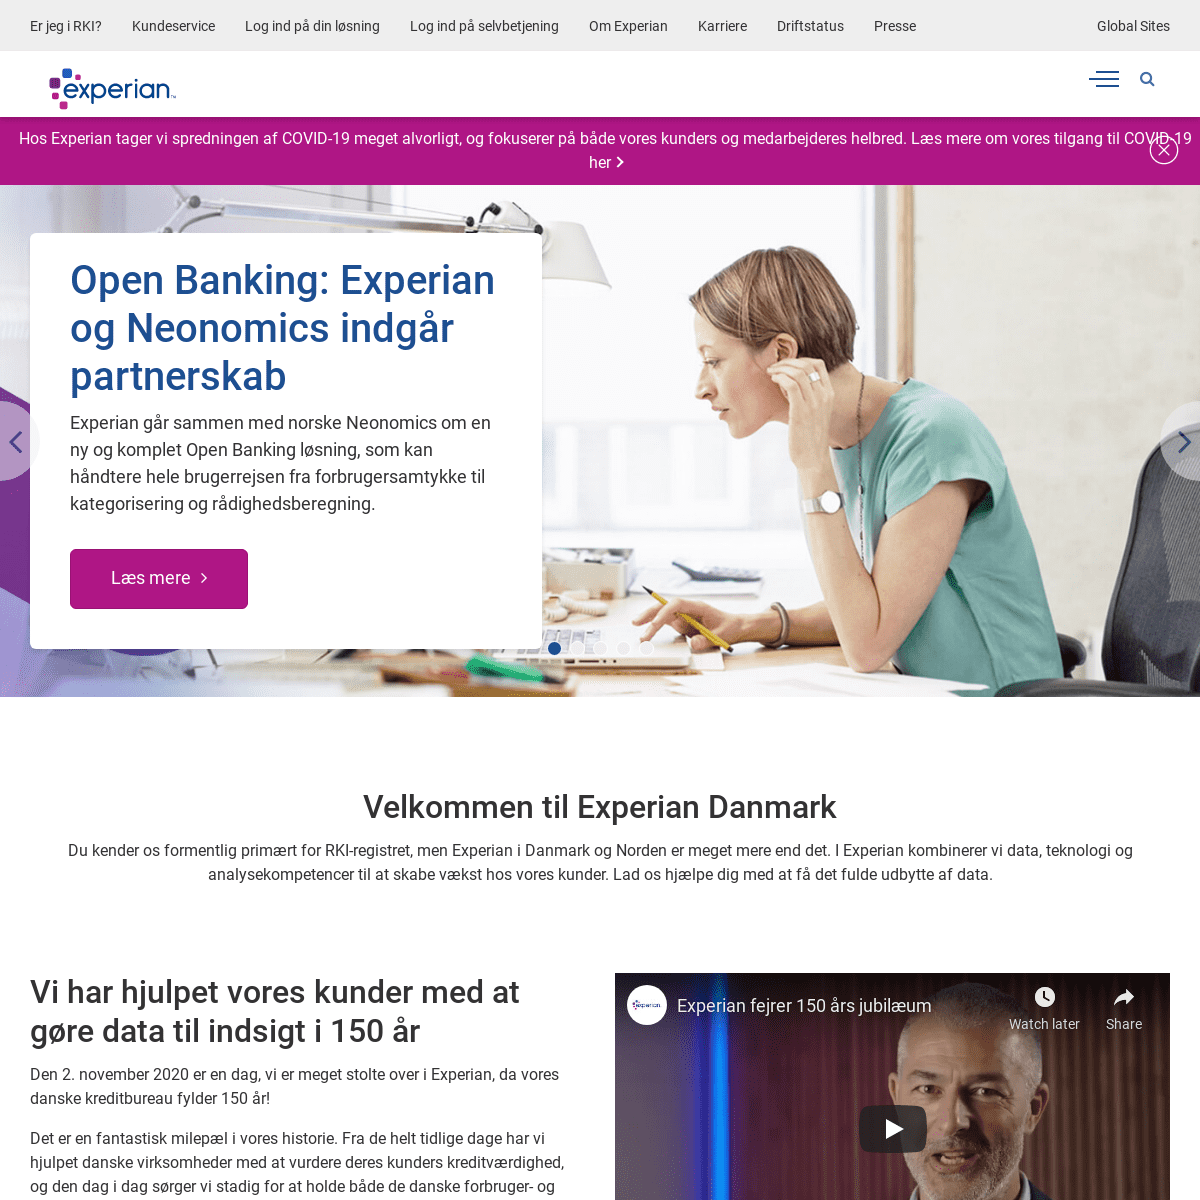 A complete backup of https://experian.dk